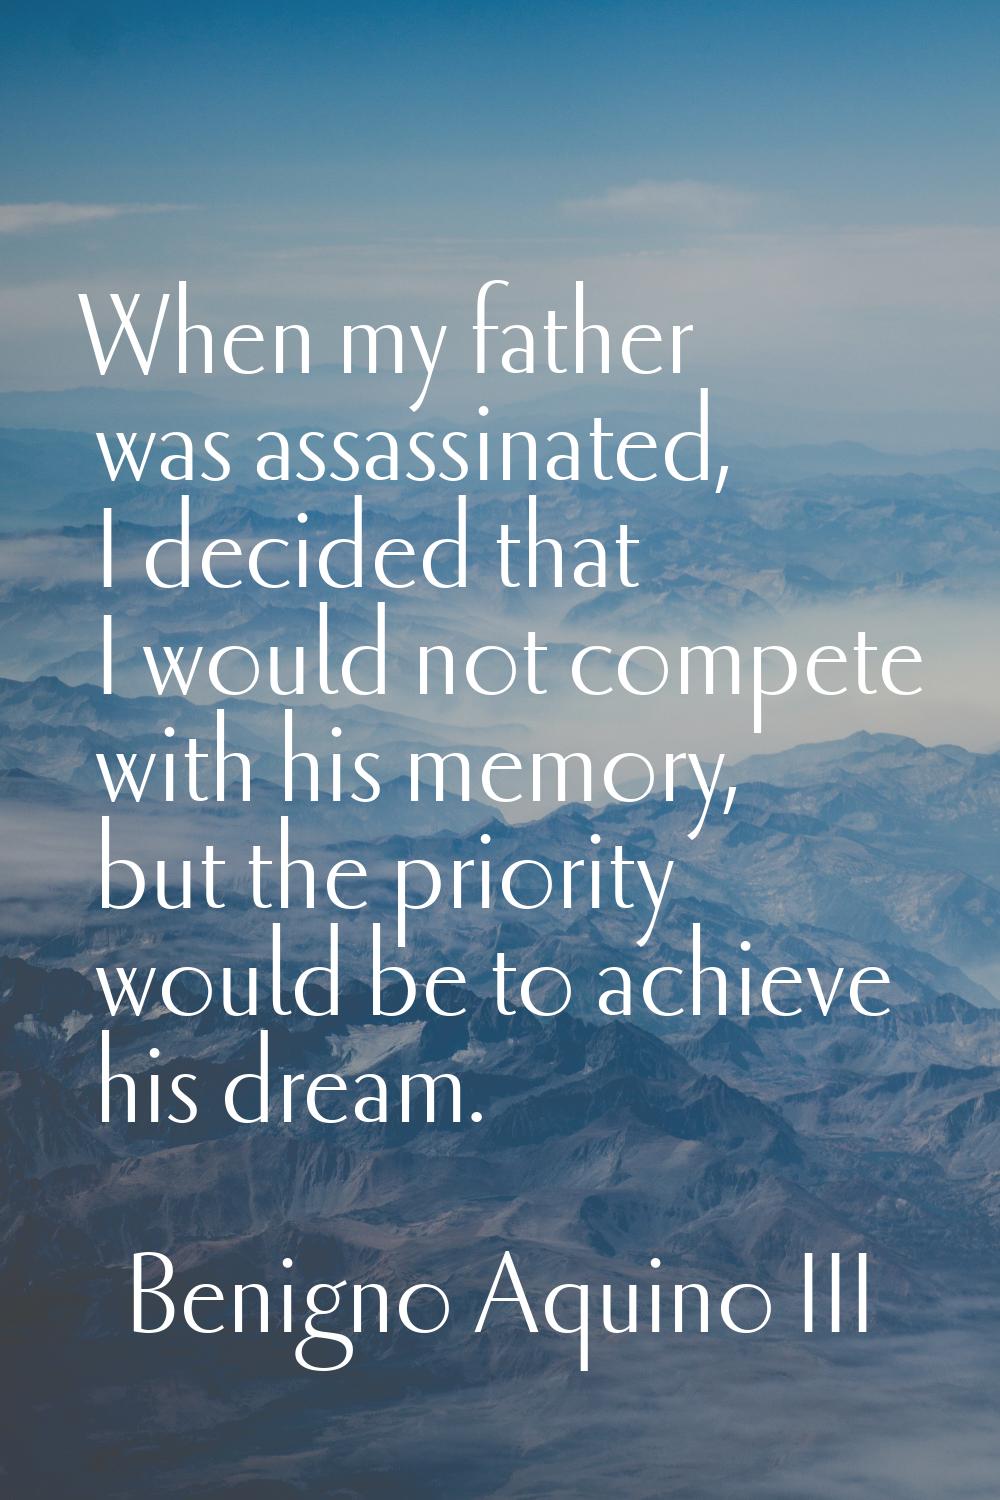 When my father was assassinated, I decided that I would not compete with his memory, but the priori